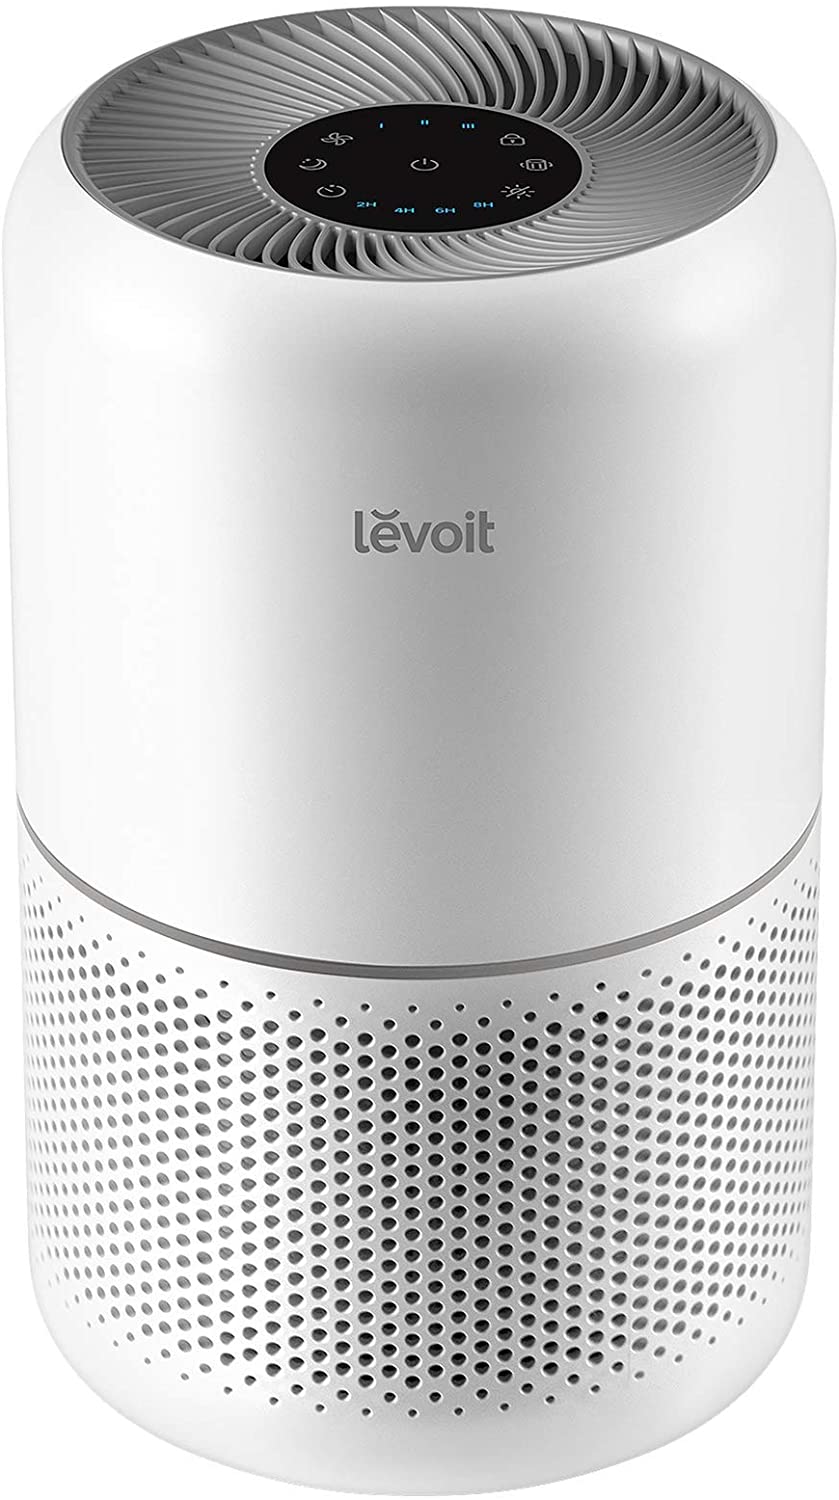 Levoit Air Purifier for Allergies and Asthma, Large Rooms Up to 547 sq. ft., Core 300-RAC, White - image 1 of 10